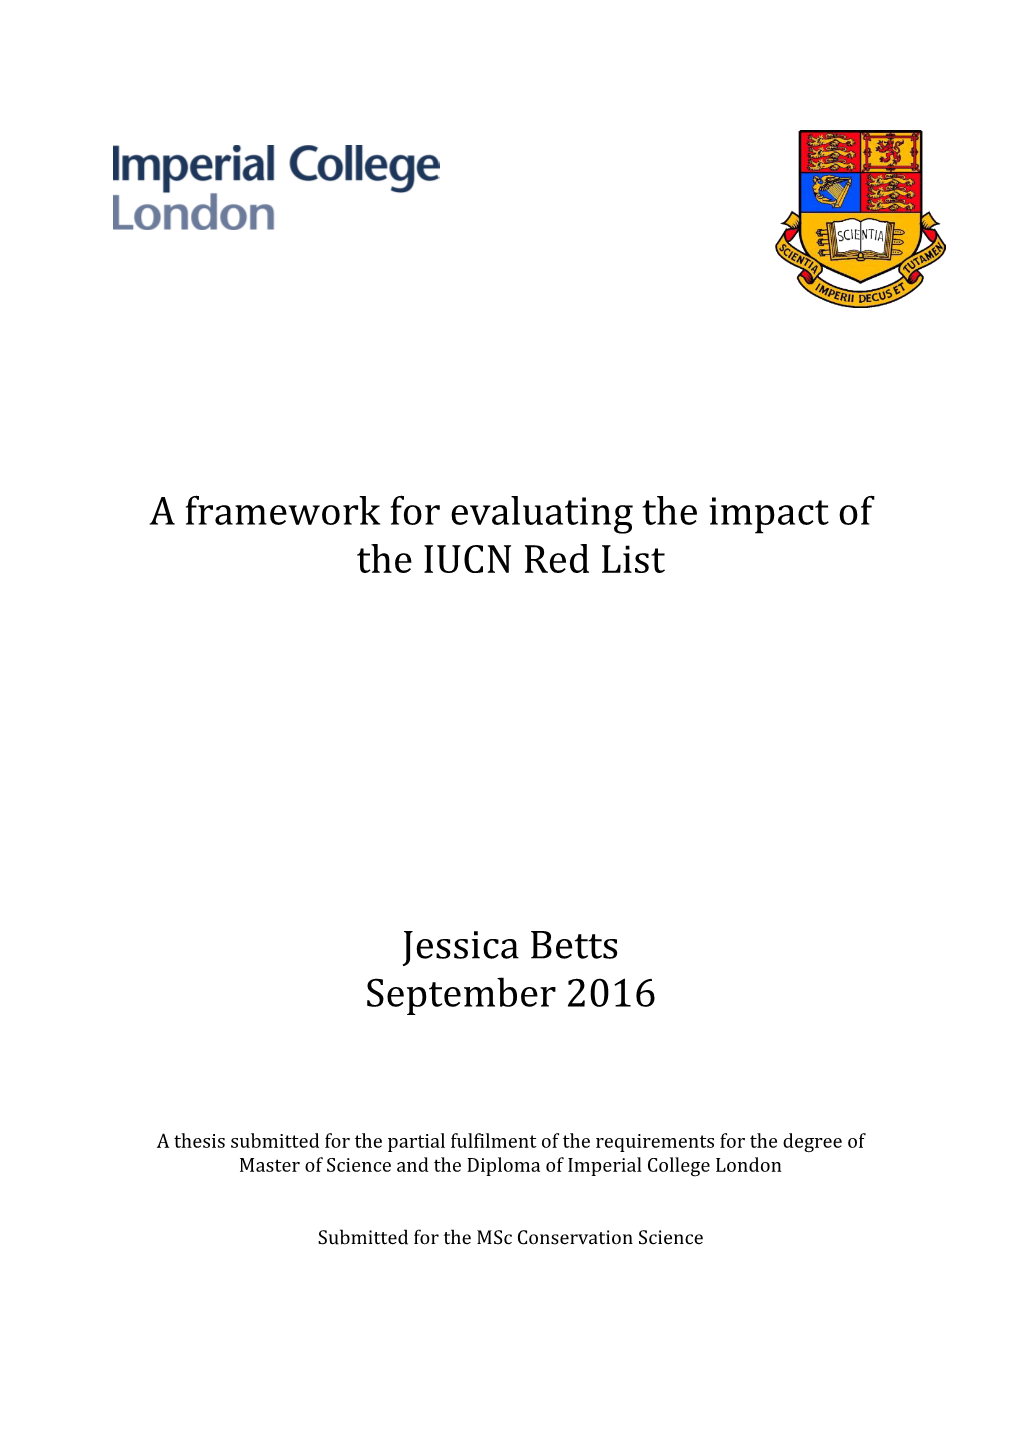 A Framework for Evaluating the Impact of the IUCN Red List Jessica Betts